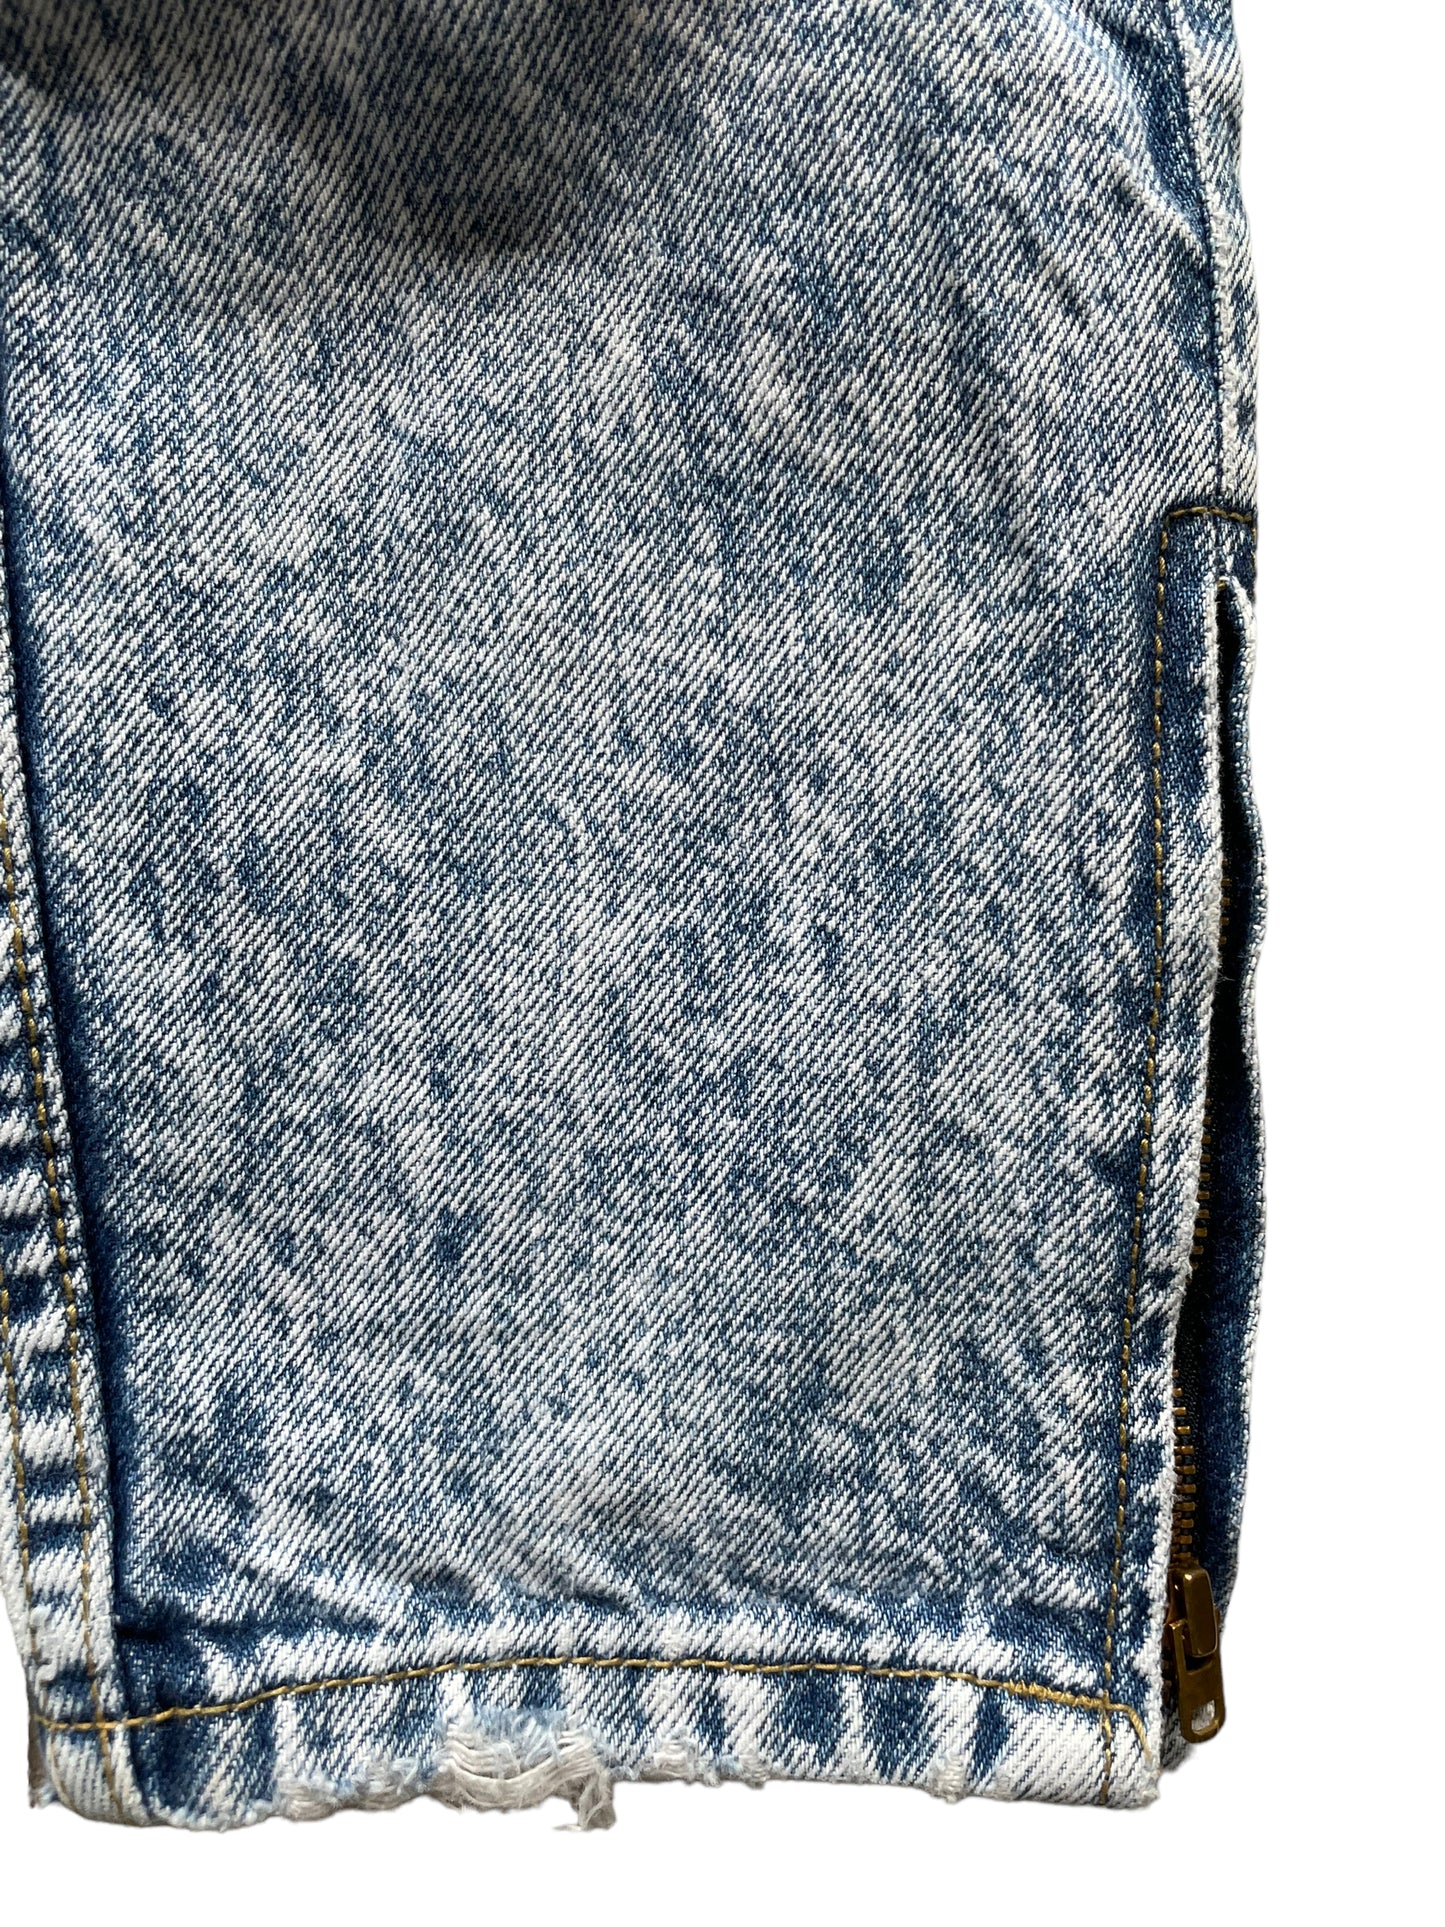 Ankle zip view of Vintage 80s Ankle Zip Acid Wash Guess Jeans